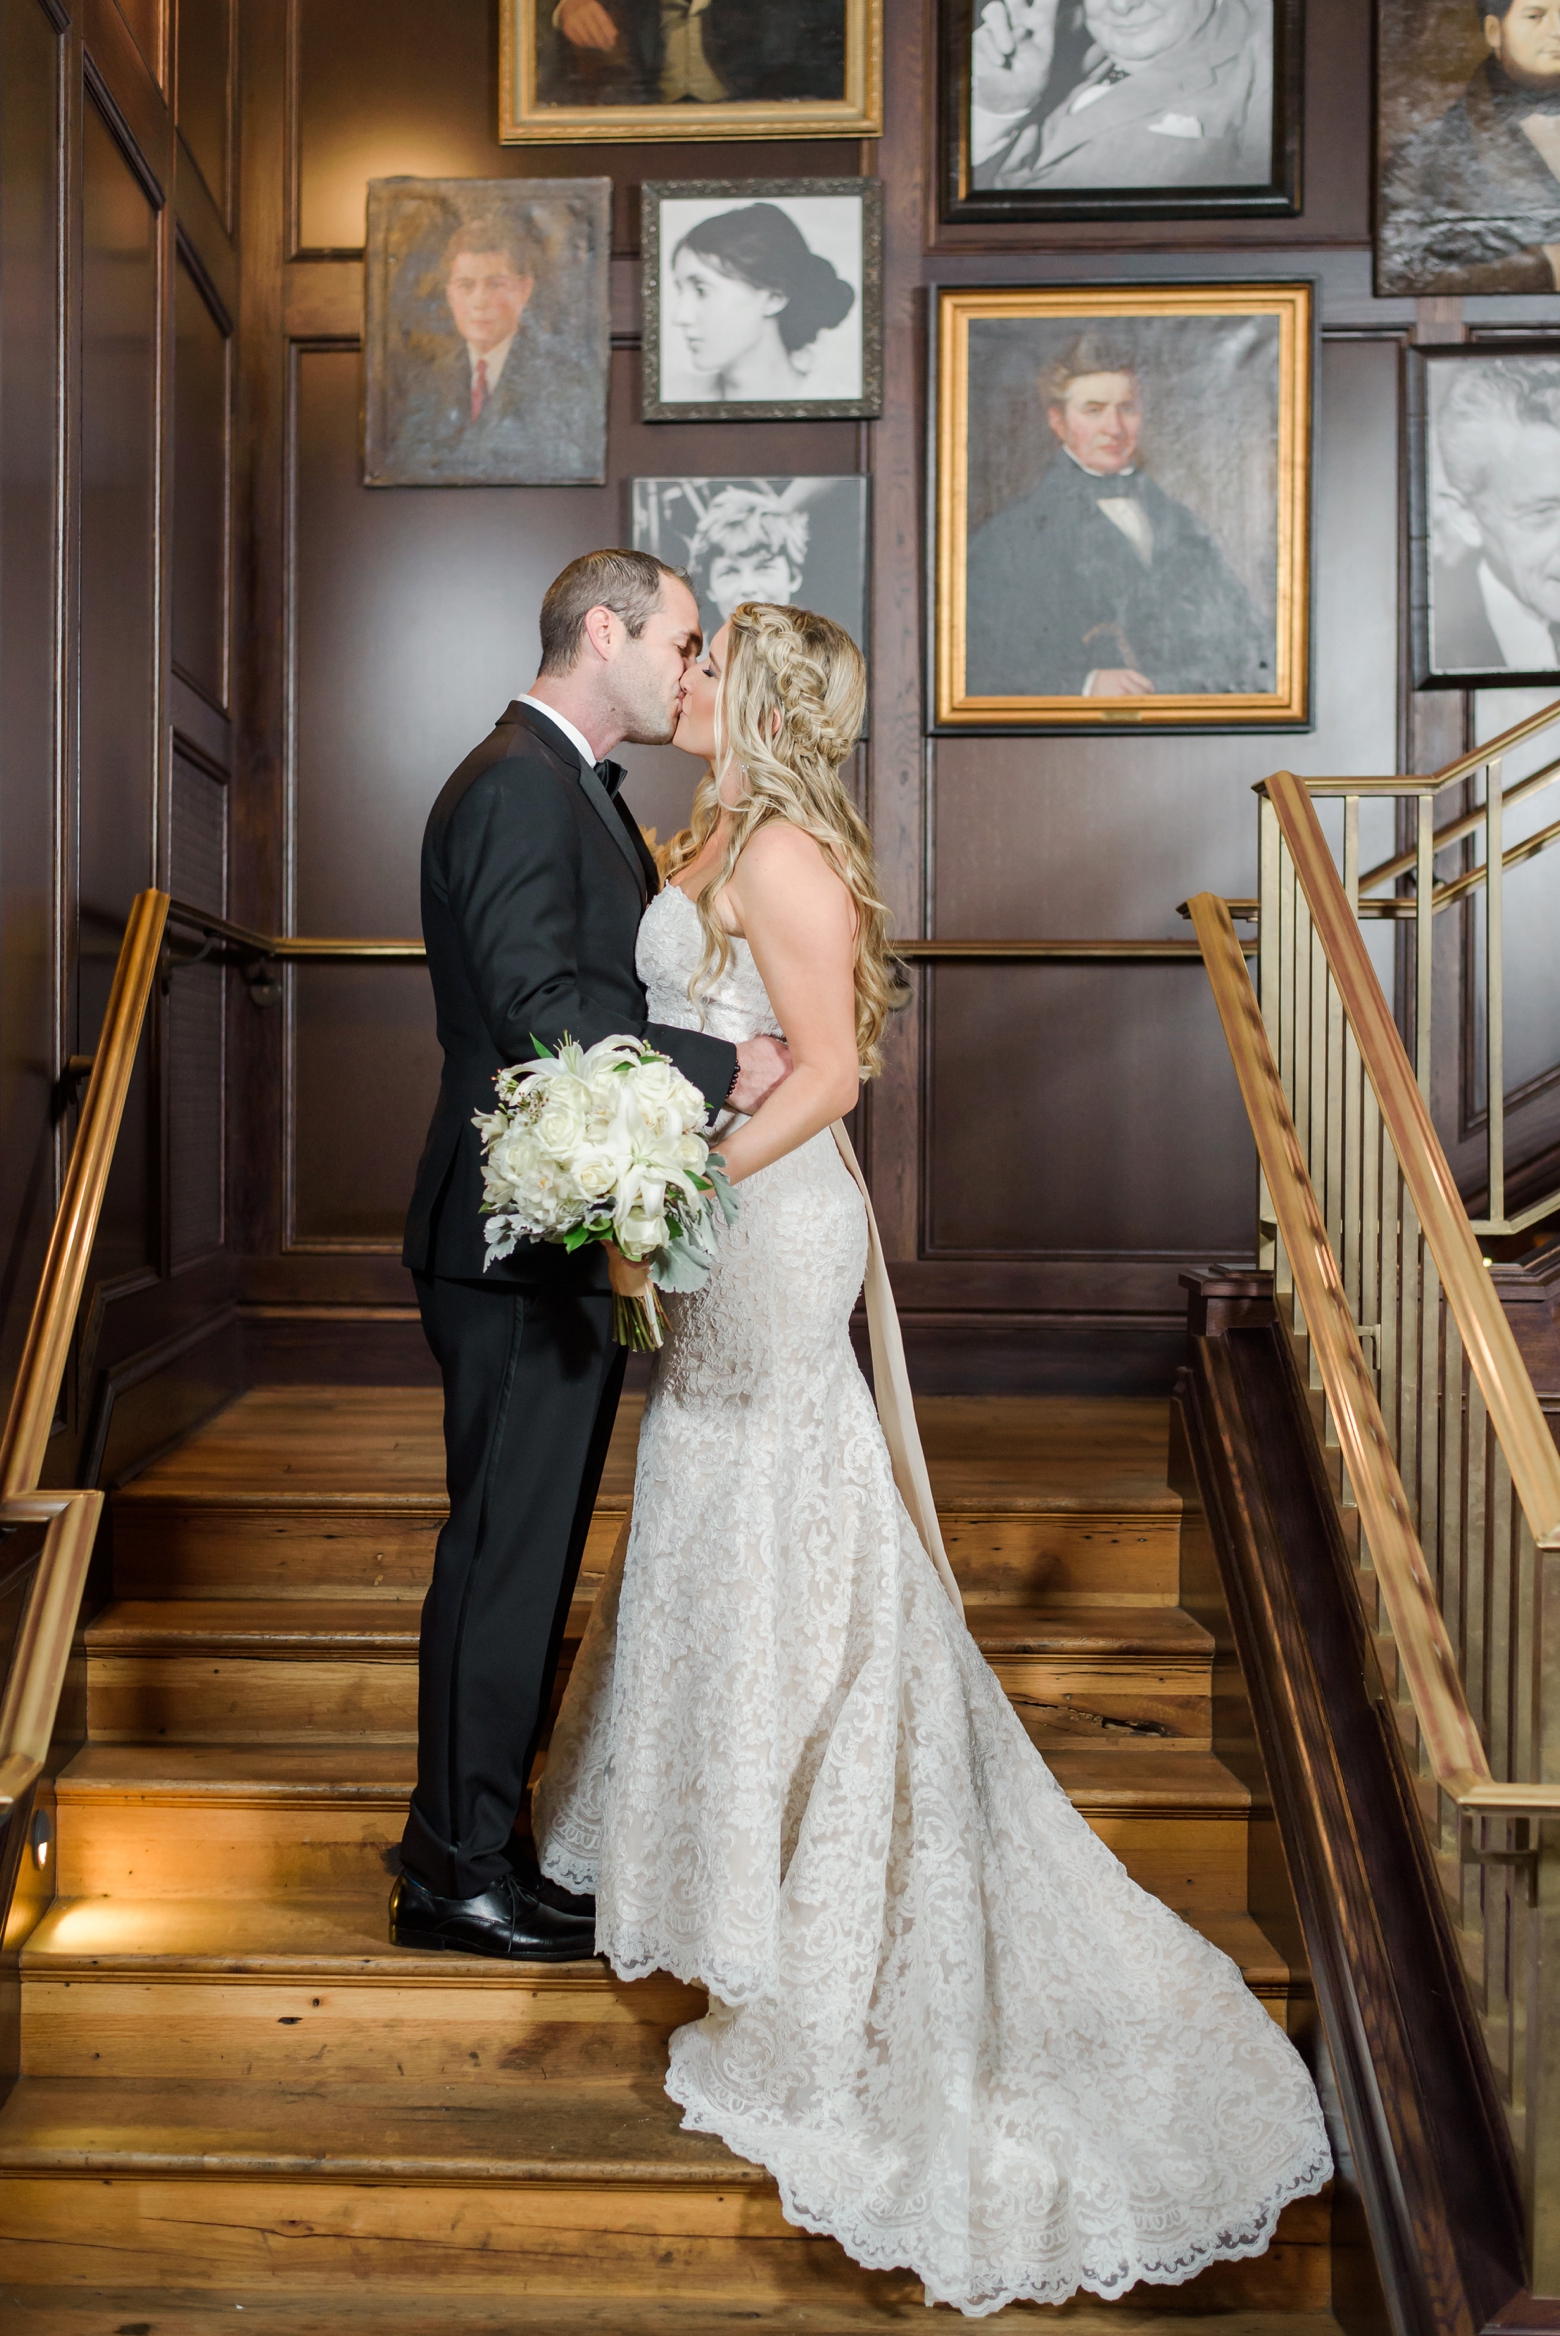 Bride and Groom kiss on a staircase as her dresses train cascades down the steps